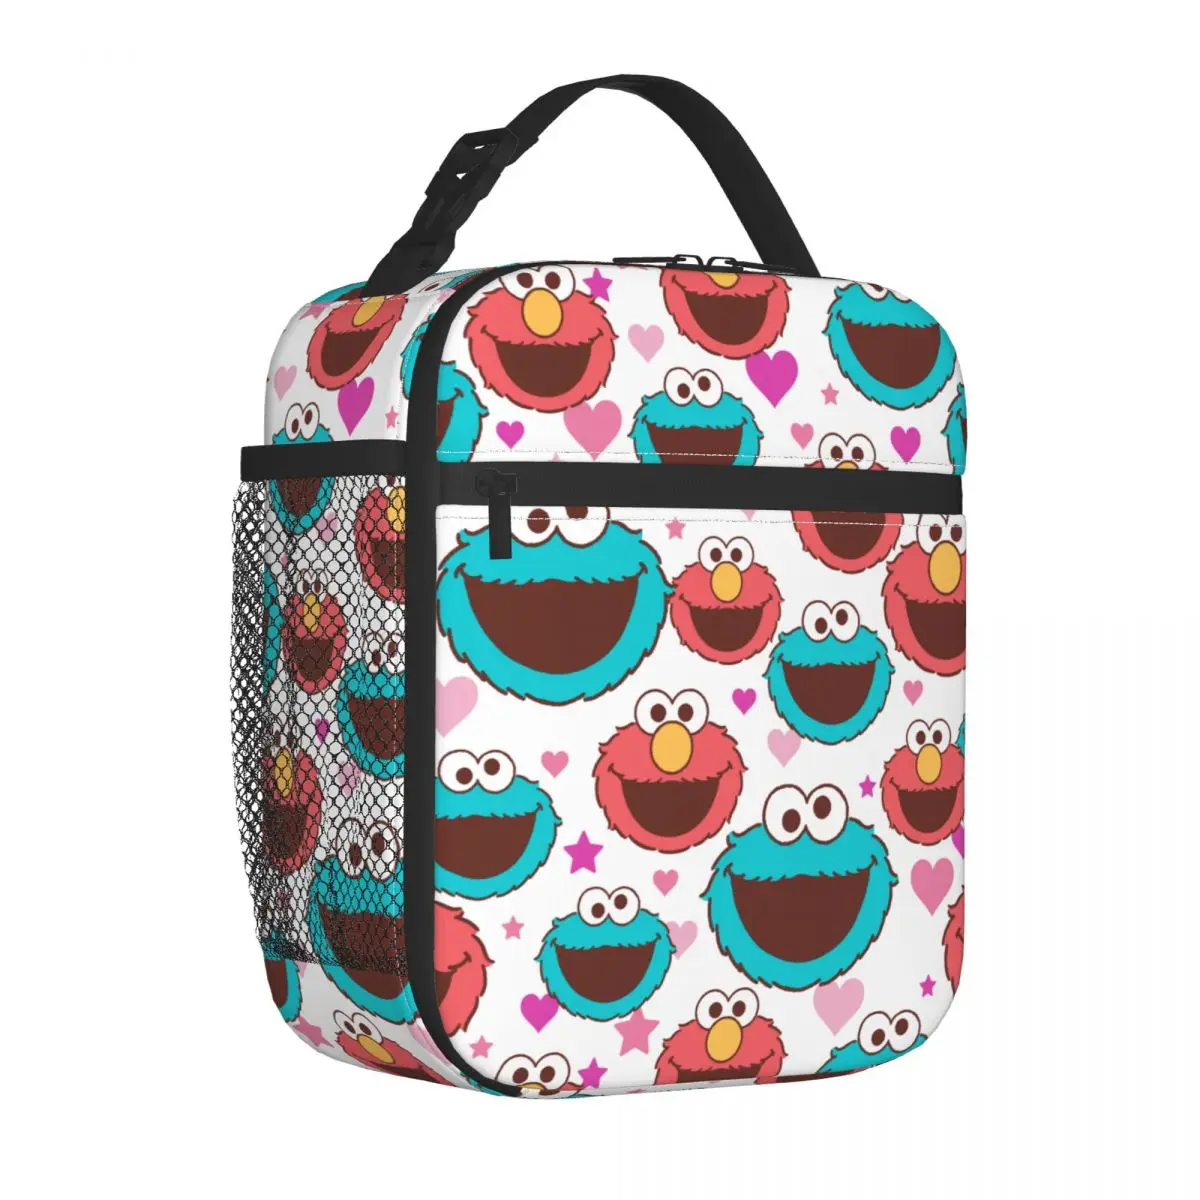 

Elmo & Cookie Monster Peace & Love Sesame Street Insulated Lunch Bags Meal Container Thermal Bag Tote Lunch Box Work Travel Men